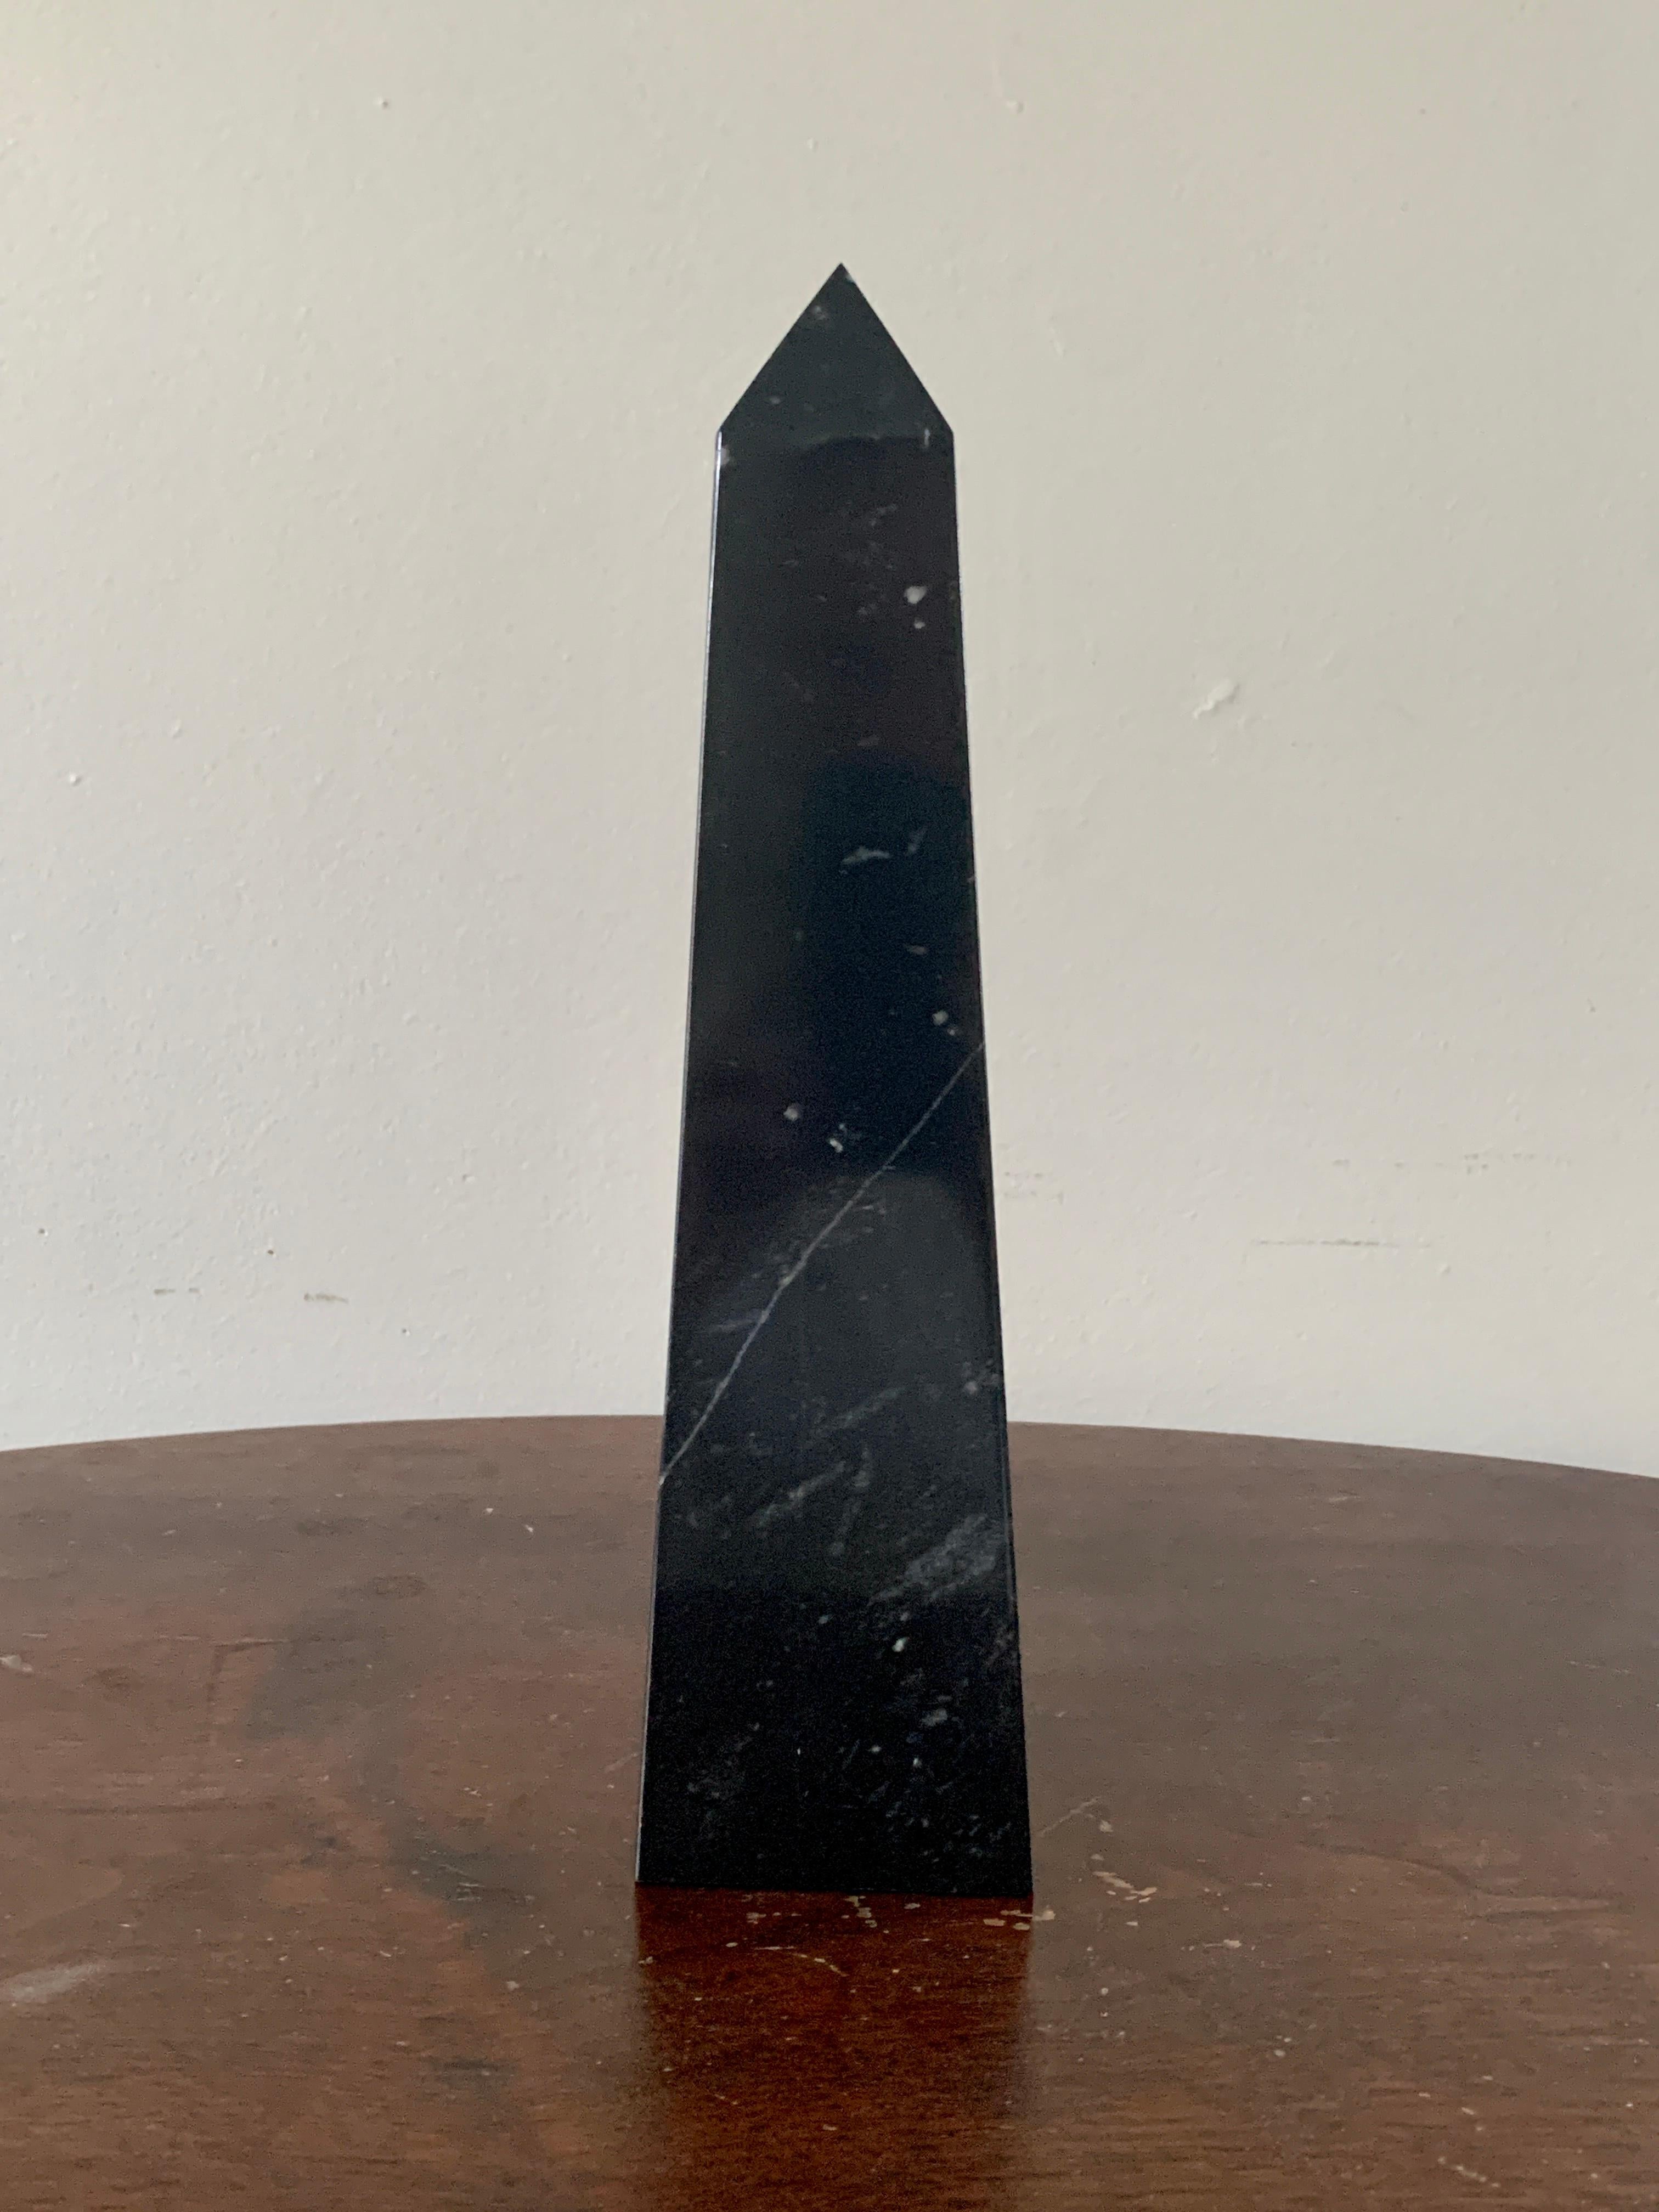 A stunning neoclassical style or Grand Tour style solid marble black & gray obelisk

Measures: 3